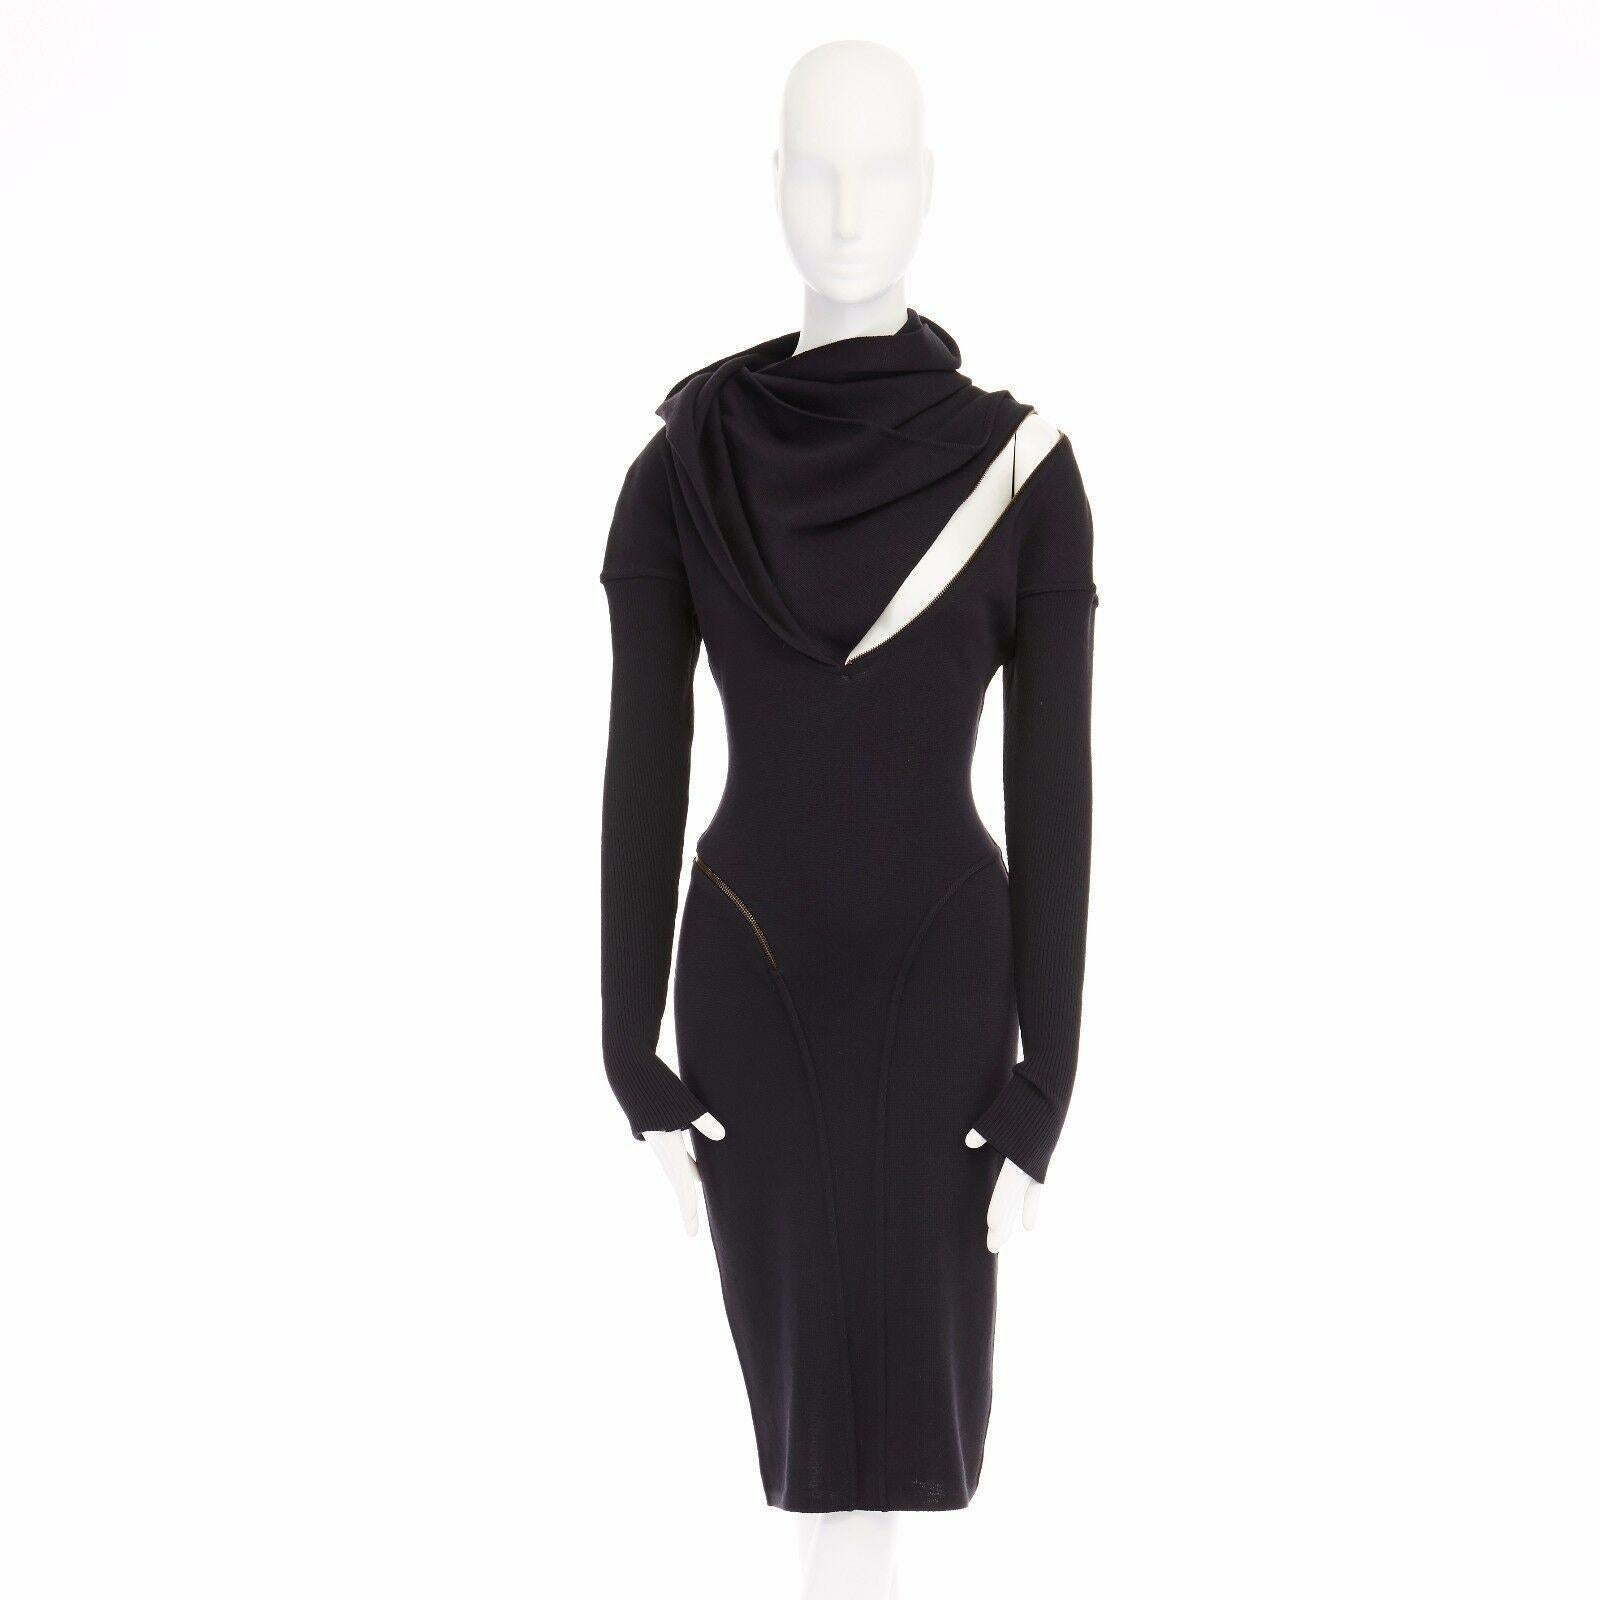 ALAIA Vintage 1987 black hooded spiral zip around fitted wool dress M

AZZEDINE ALAIA VINTAGE
FROM THE 1987 COLLECTION
AS EXHIBITED IN LA PALAIS GALLIERA
Black wool dress . Hooded . Draped neckline . Adjustable neckline with dual snap button detail